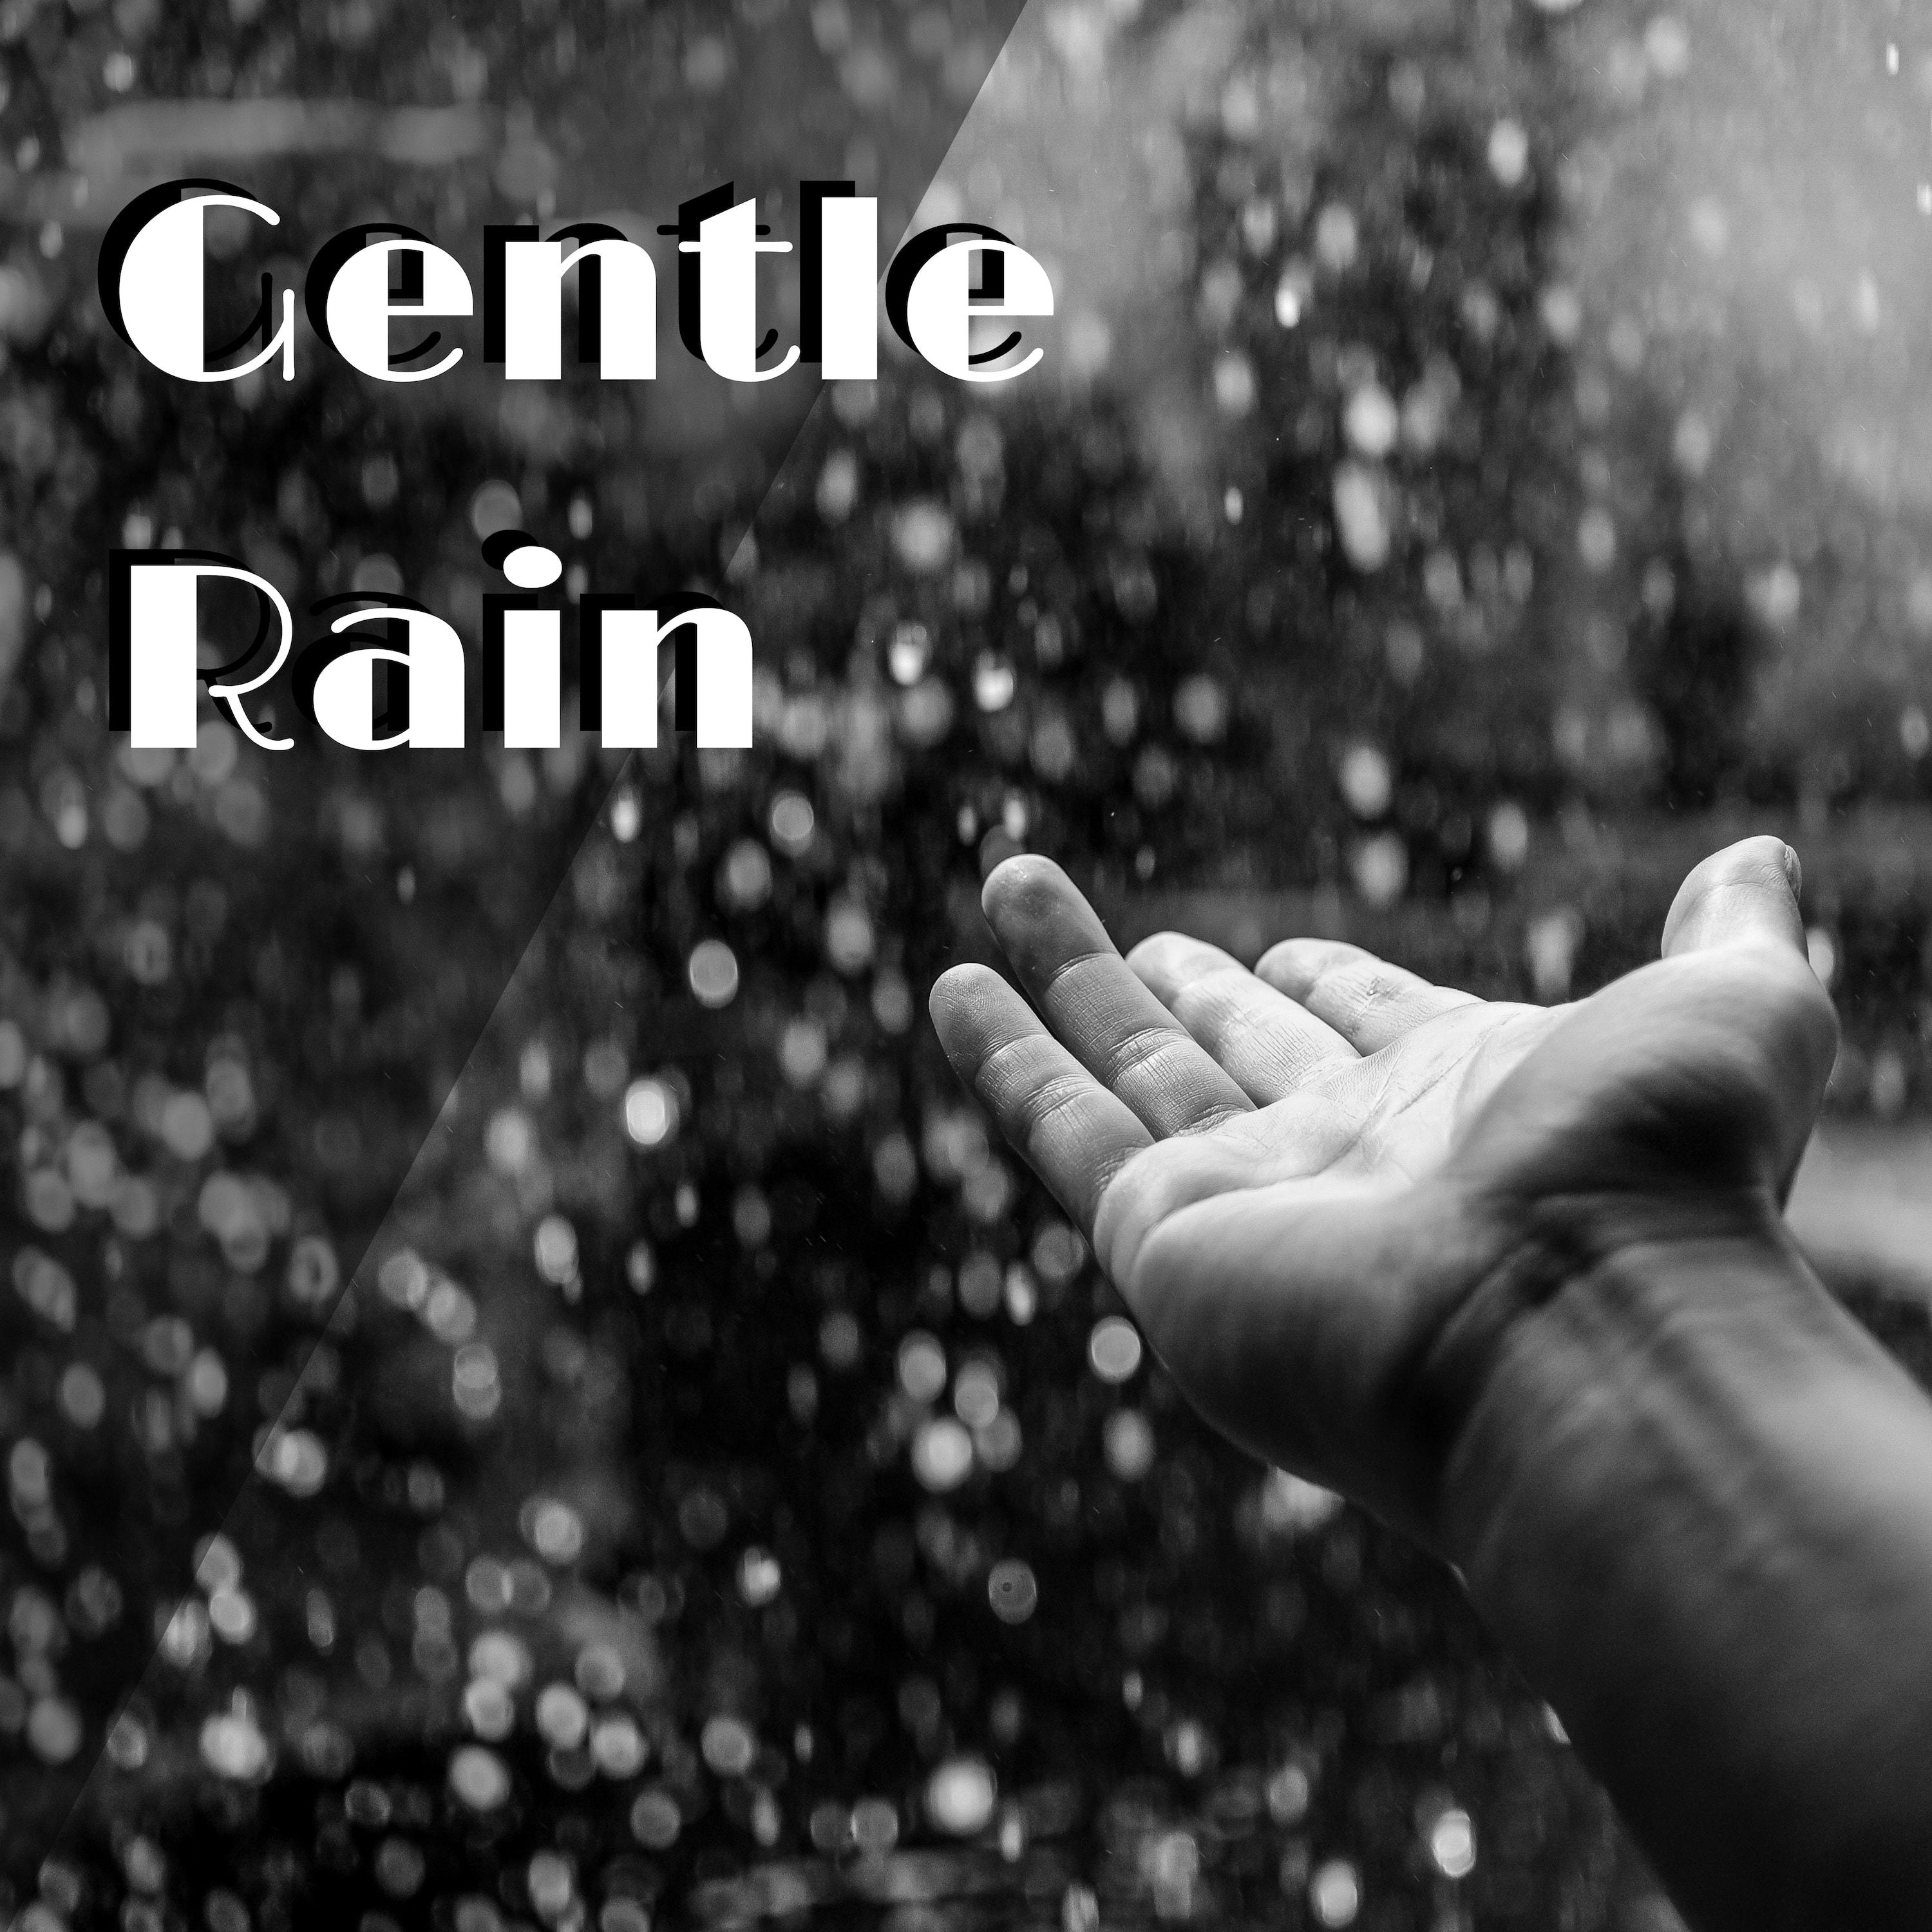 Gentle Rain - Night Ambience, Falling Rain Sounds of Nature for Soul Purification